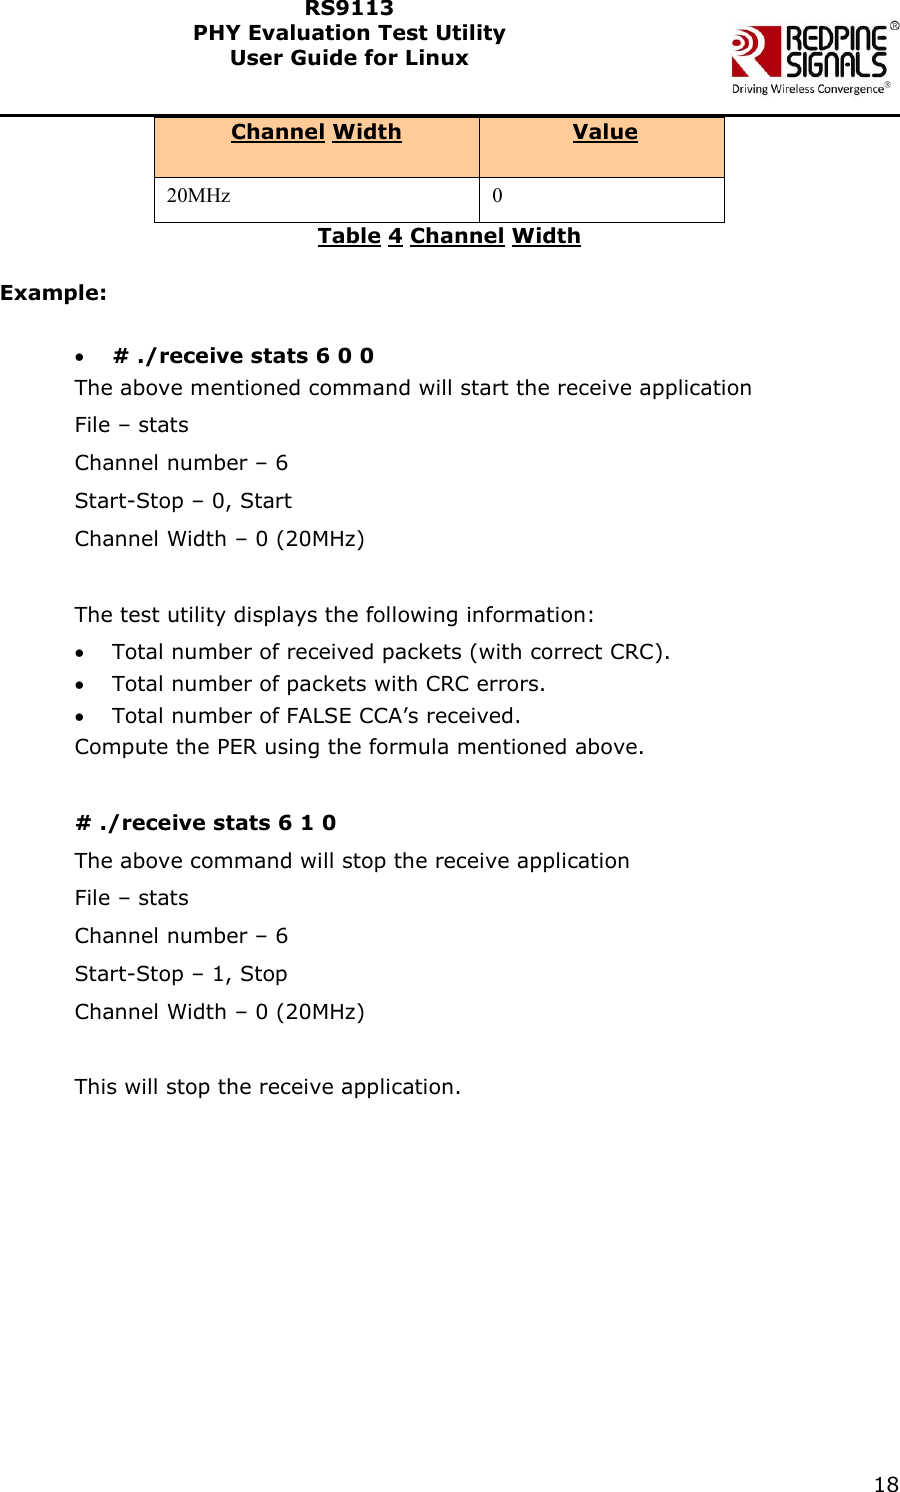    18  RS9113 PHY Evaluation Test Utility  User Guide for Linux  Channel Width  Value 20MHz 0 Table 4 Channel Width  Example:   # ./receive stats 6 0 0 The above mentioned command will start the receive application File – stats Channel number – 6 Start-Stop – 0, Start Channel Width – 0 (20MHz)  The test utility displays the following information:  Total number of received packets (with correct CRC).  Total number of packets with CRC errors.   Total number of FALSE CCA’s received.  Compute the PER using the formula mentioned above.  # ./receive stats 6 1 0 The above command will stop the receive application File – stats Channel number – 6 Start-Stop – 1, Stop Channel Width – 0 (20MHz)  This will stop the receive application. 